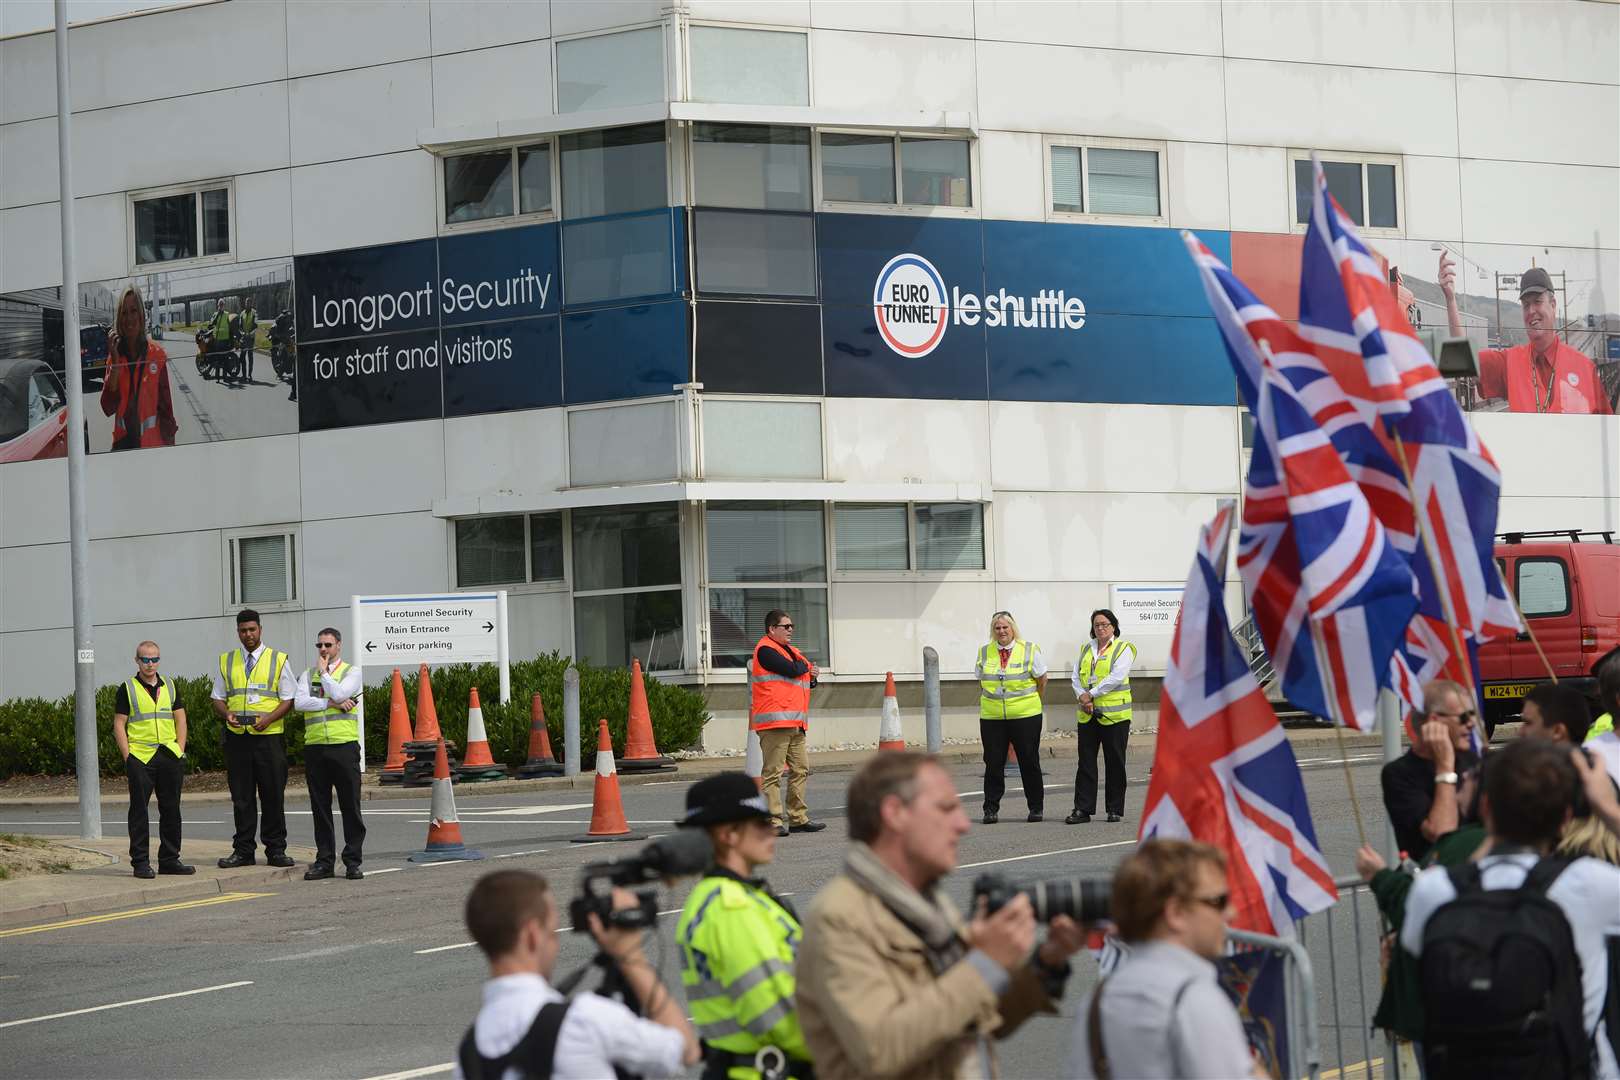 The protesters gathered outside the Eurotunnel terminal